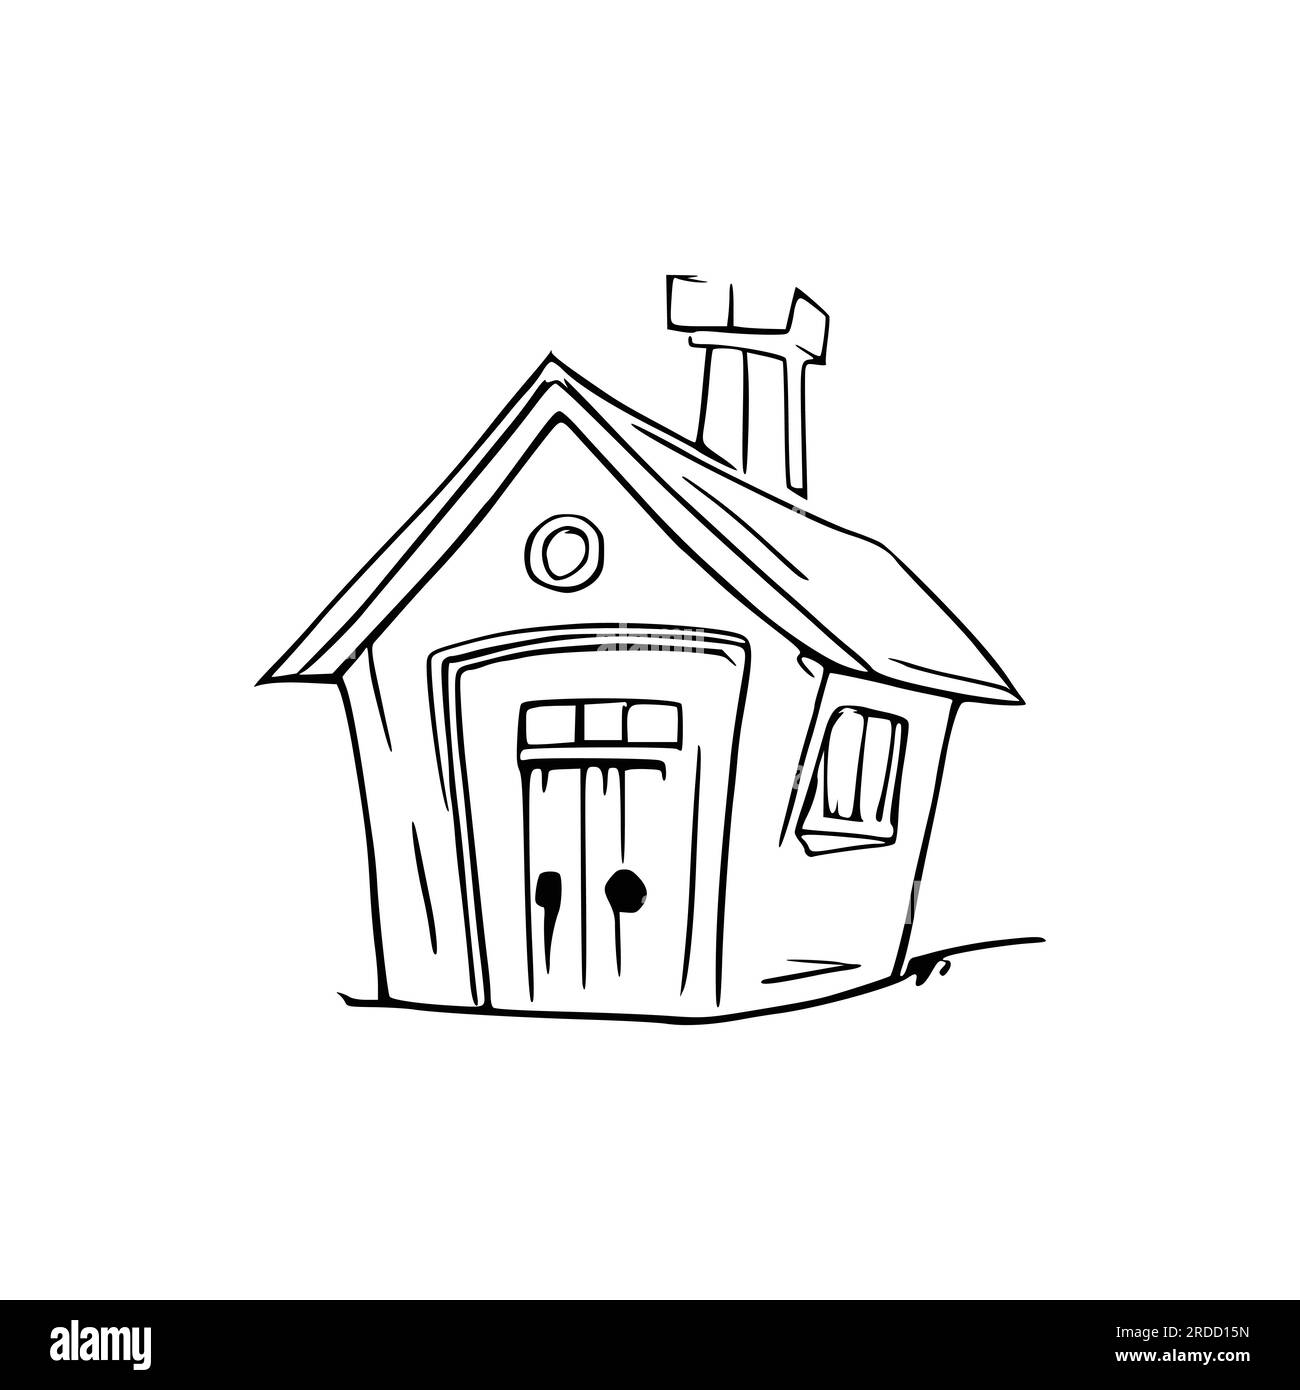 Nice simple house coloring book line art house outline house house coloring page line art home black and white coloring pages stock vector image art